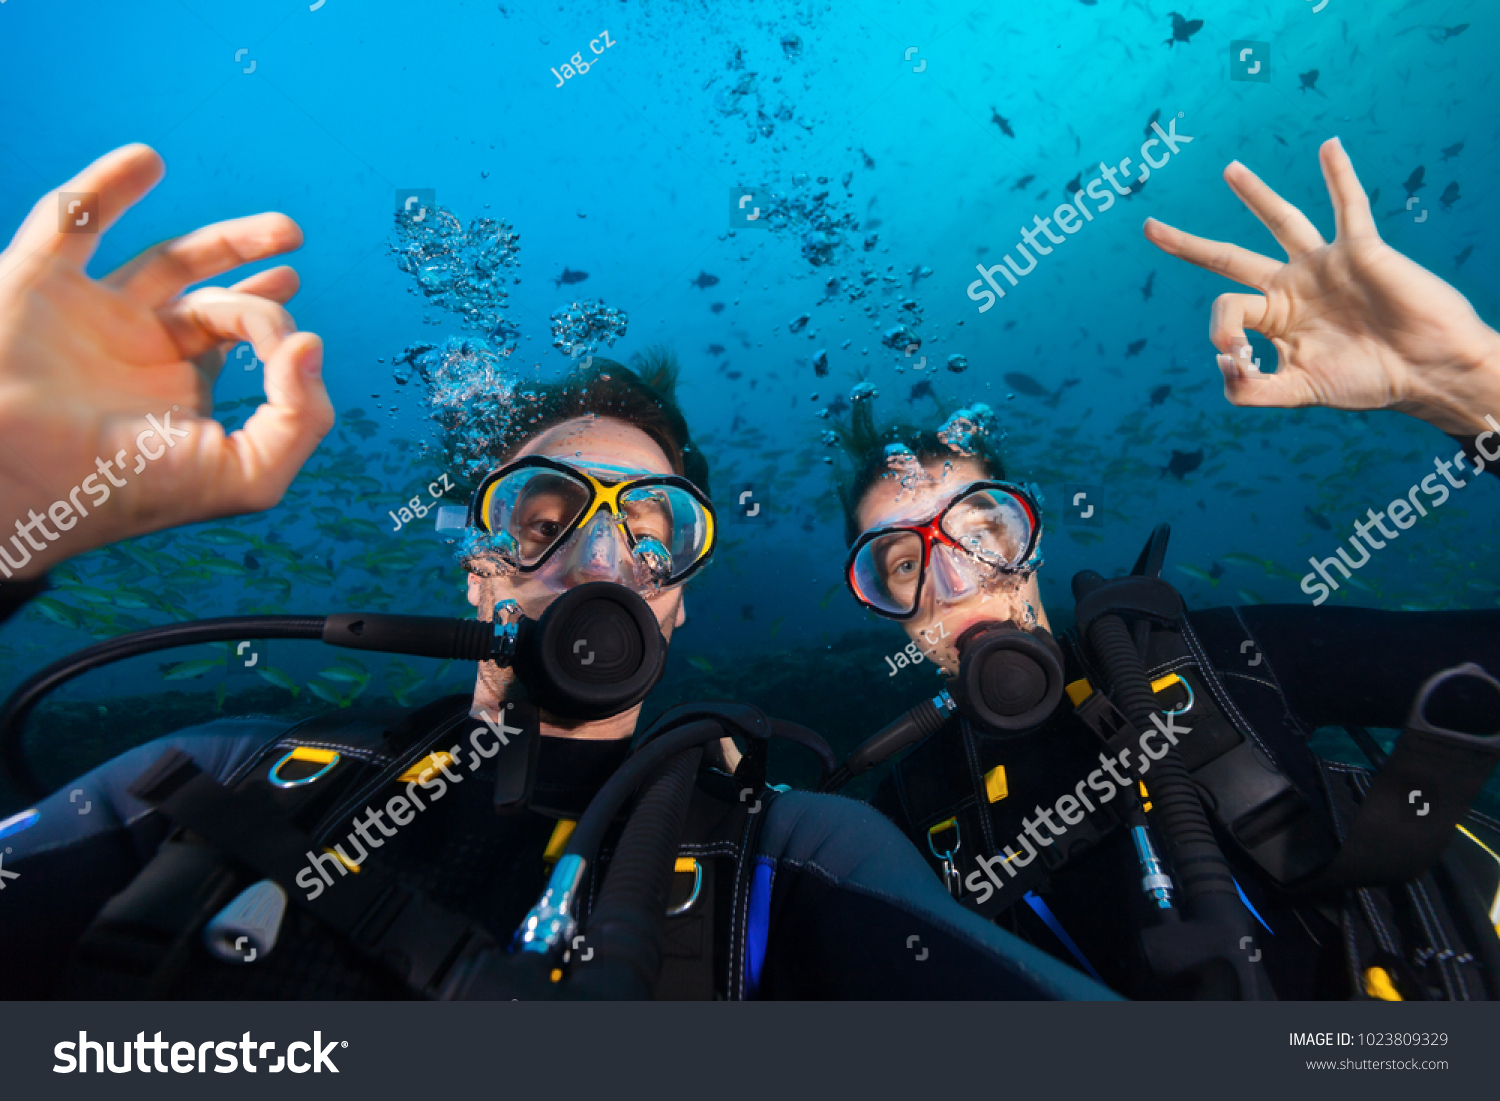 Couple of scuba divers showing ok sign, portrait photography. Underwater sports and activities #1023809329